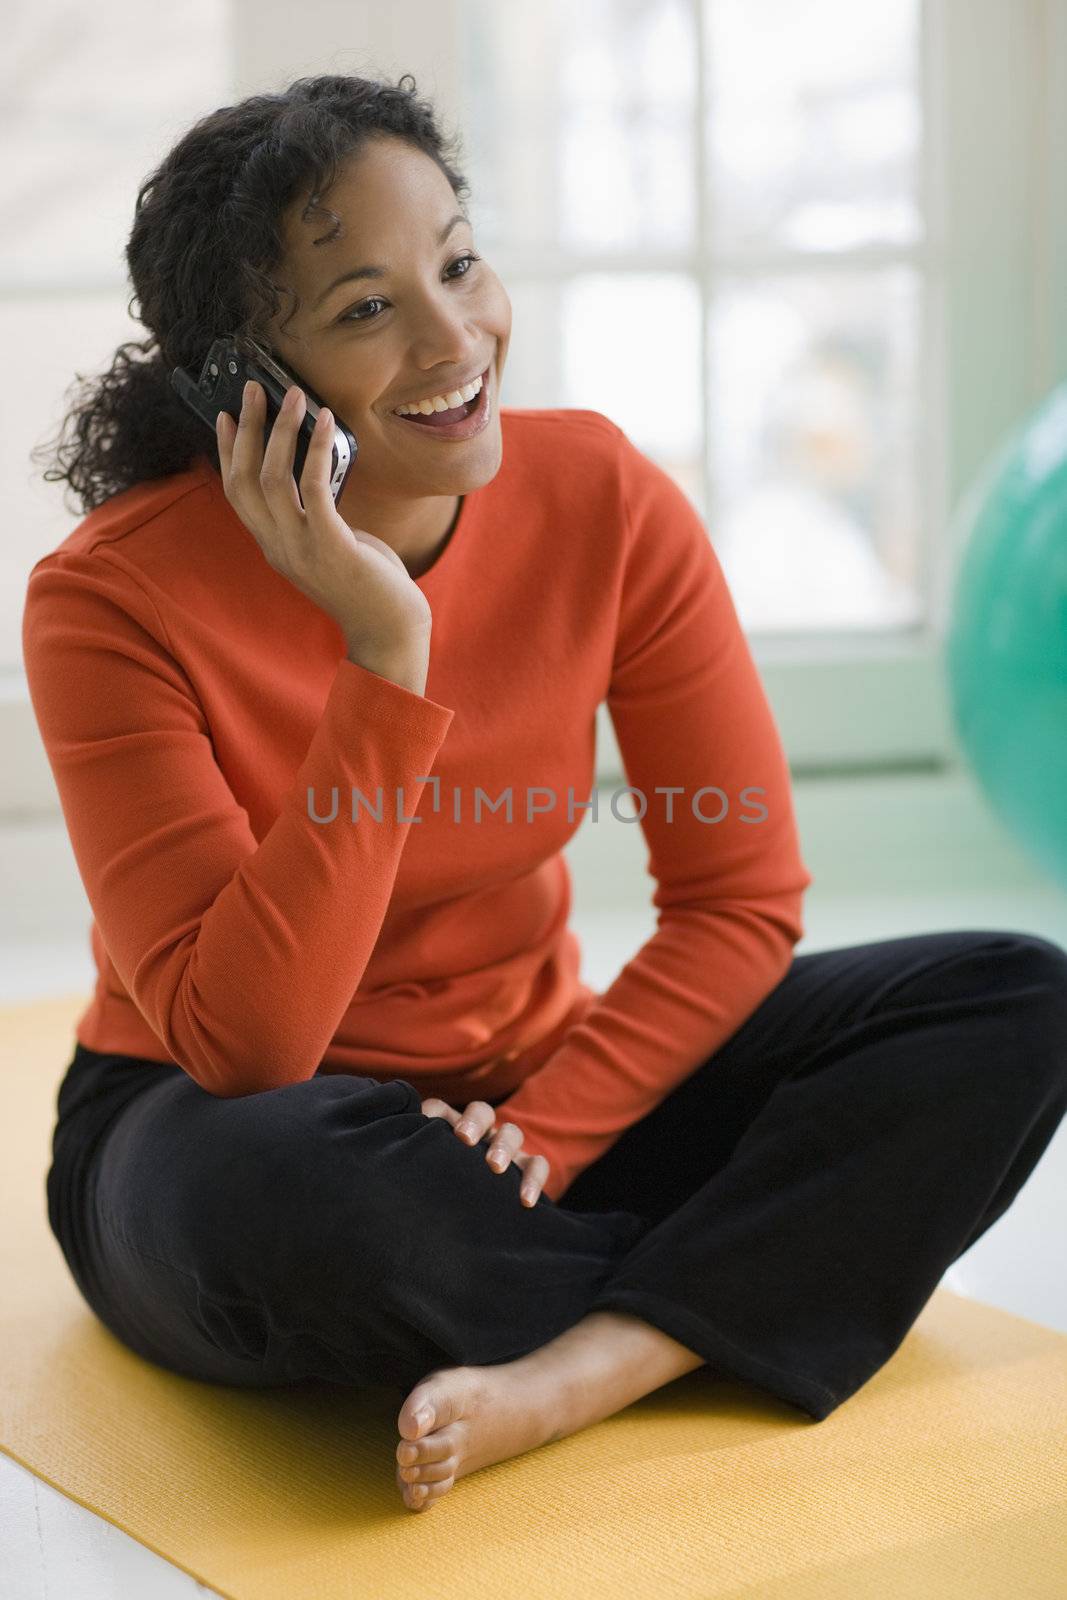 Smiling beautiful African American woman sitting on yoga mat talking on cell phone